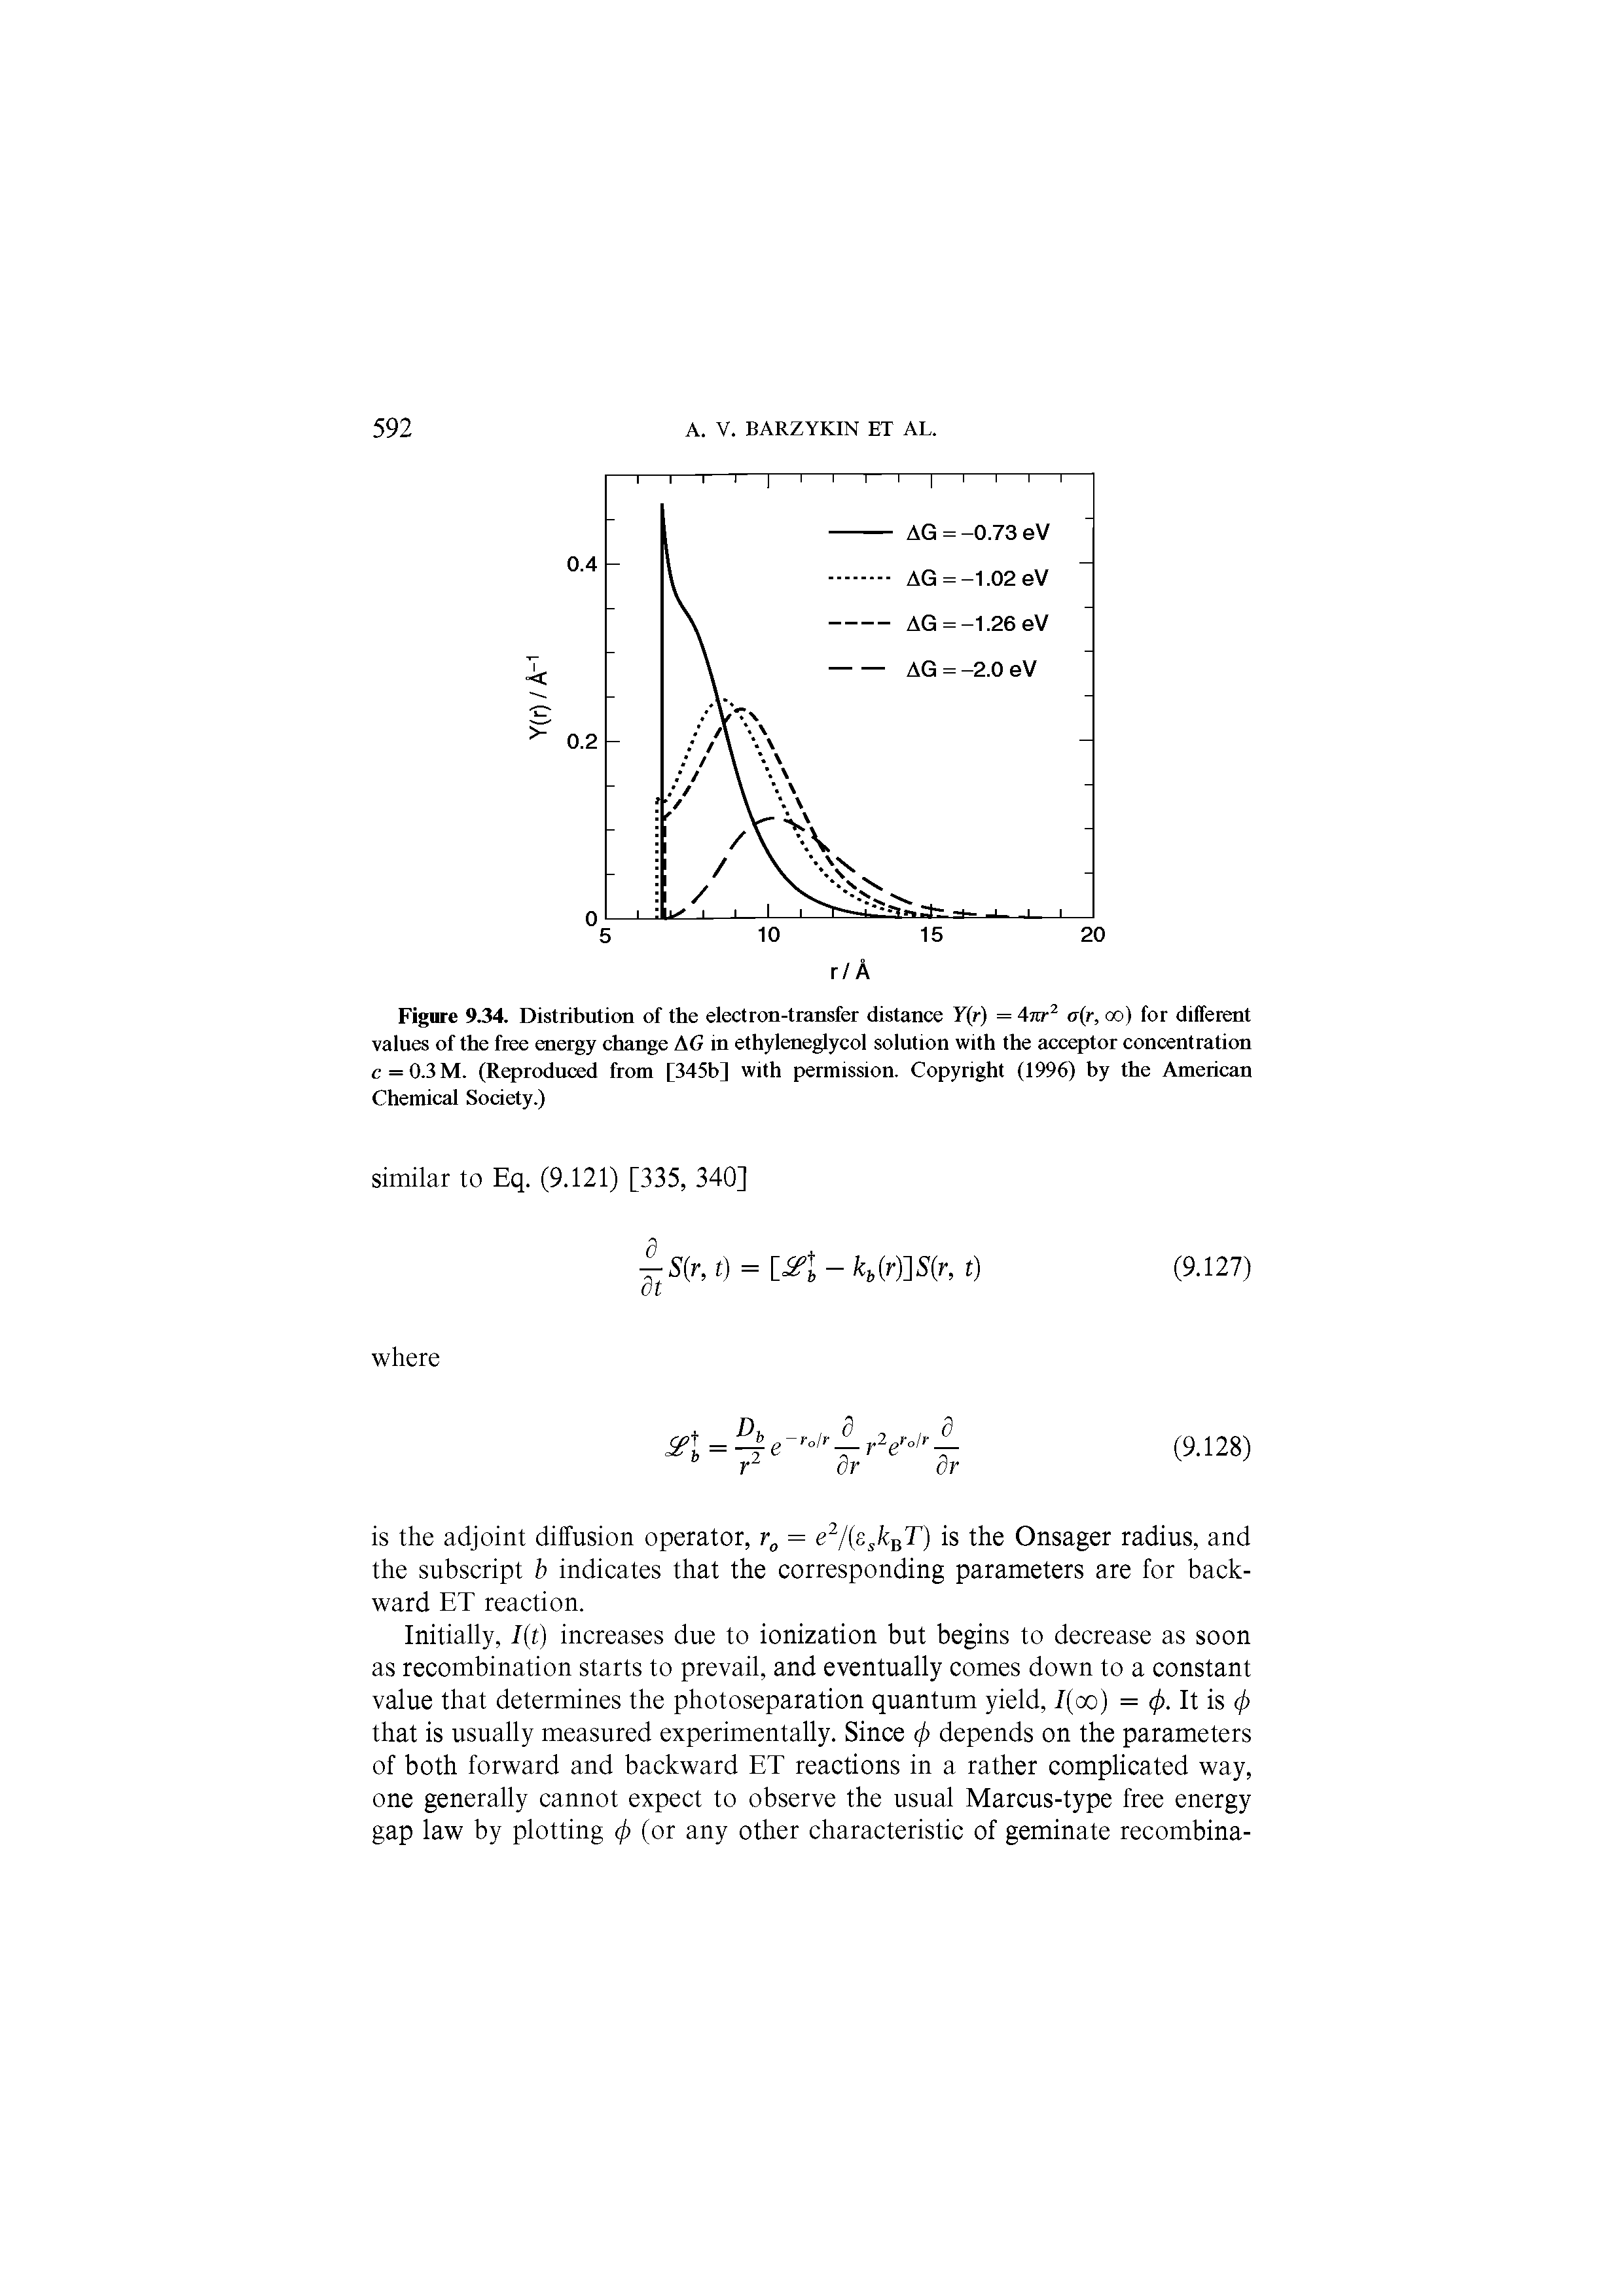 Figure 934. Distribution of the electron-transfer distance Y r) = a(r, oo) for different values of the free energy change AG in ethyleneglycol solution with the acceptor concentration c = 0.3M. (Reproduced from [345b] with permission. Copyright (1996) by the American Chemical Society.)...